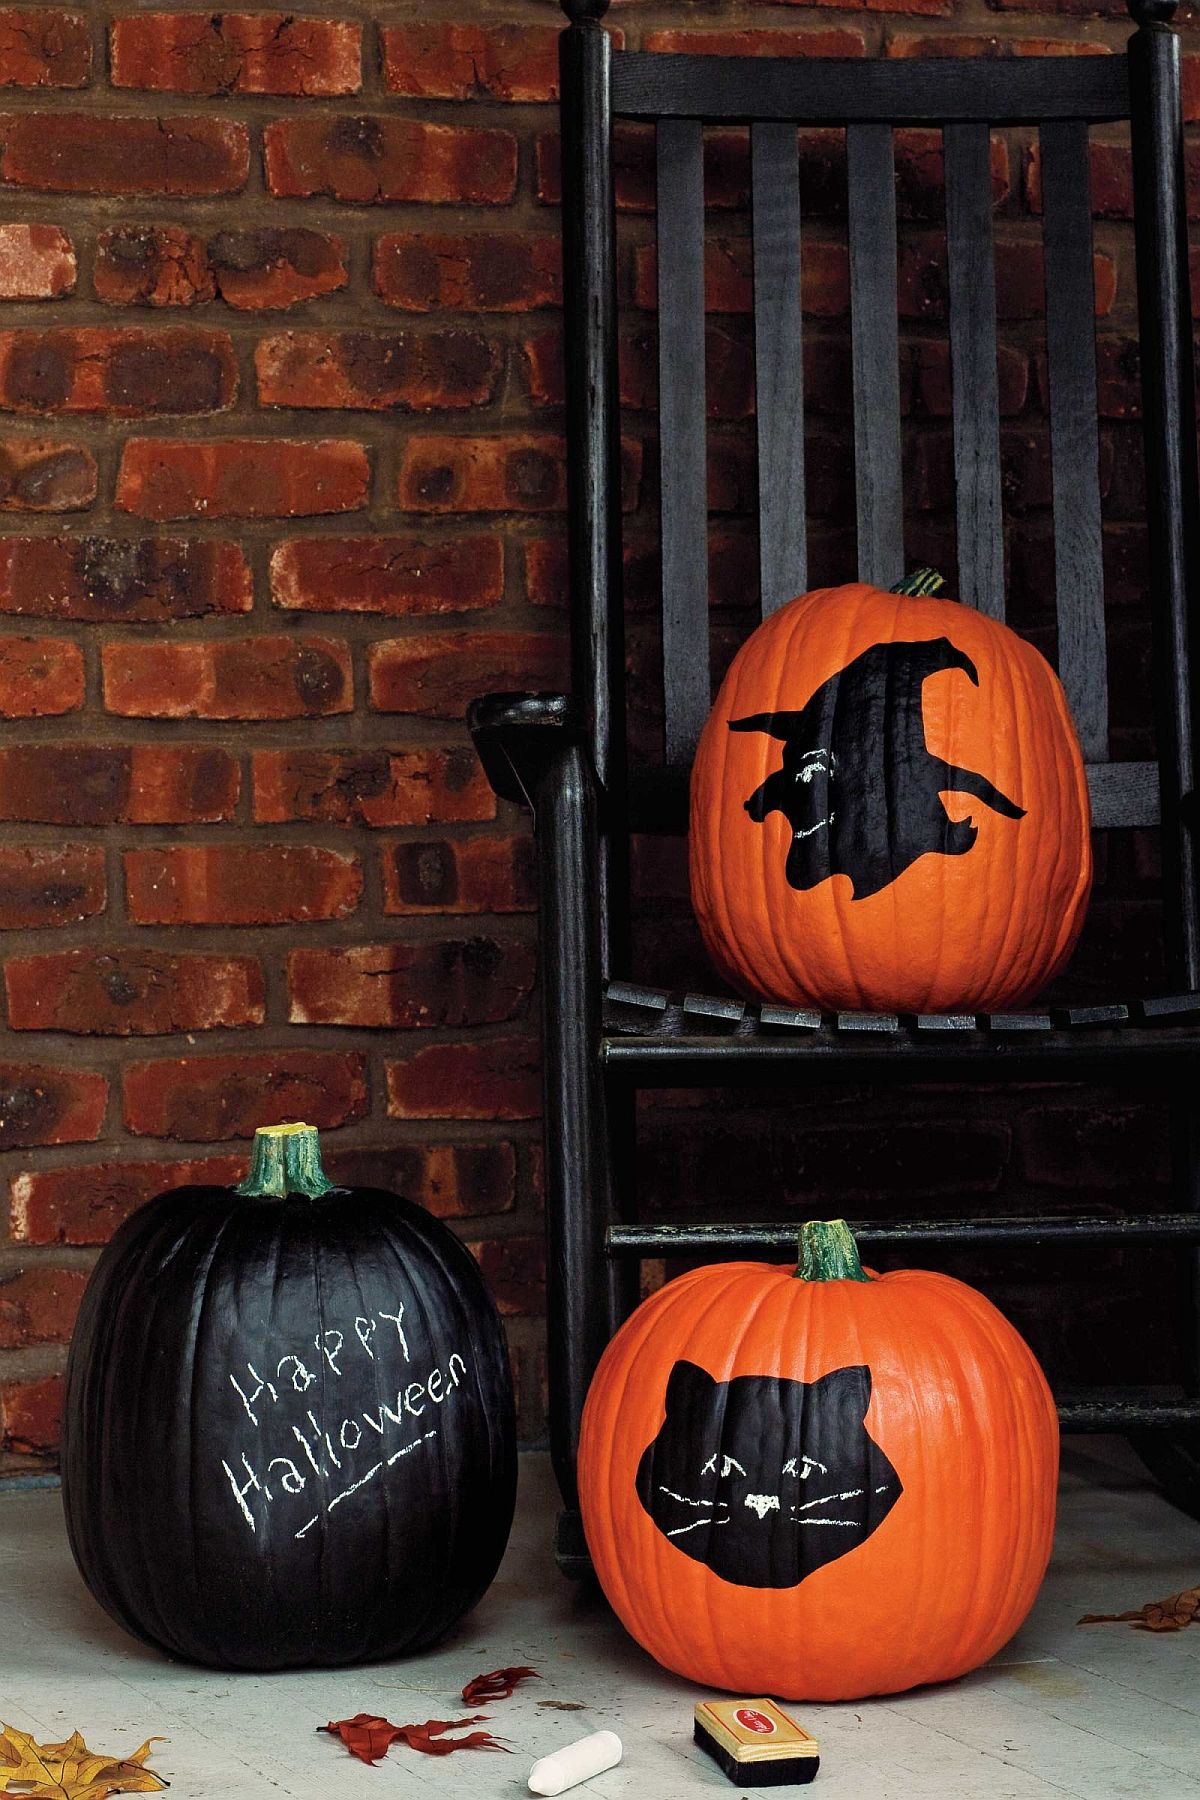 Use-chalkboard-and-paint-to-create-a-cool-pumpkin-clad-Halloween-porch